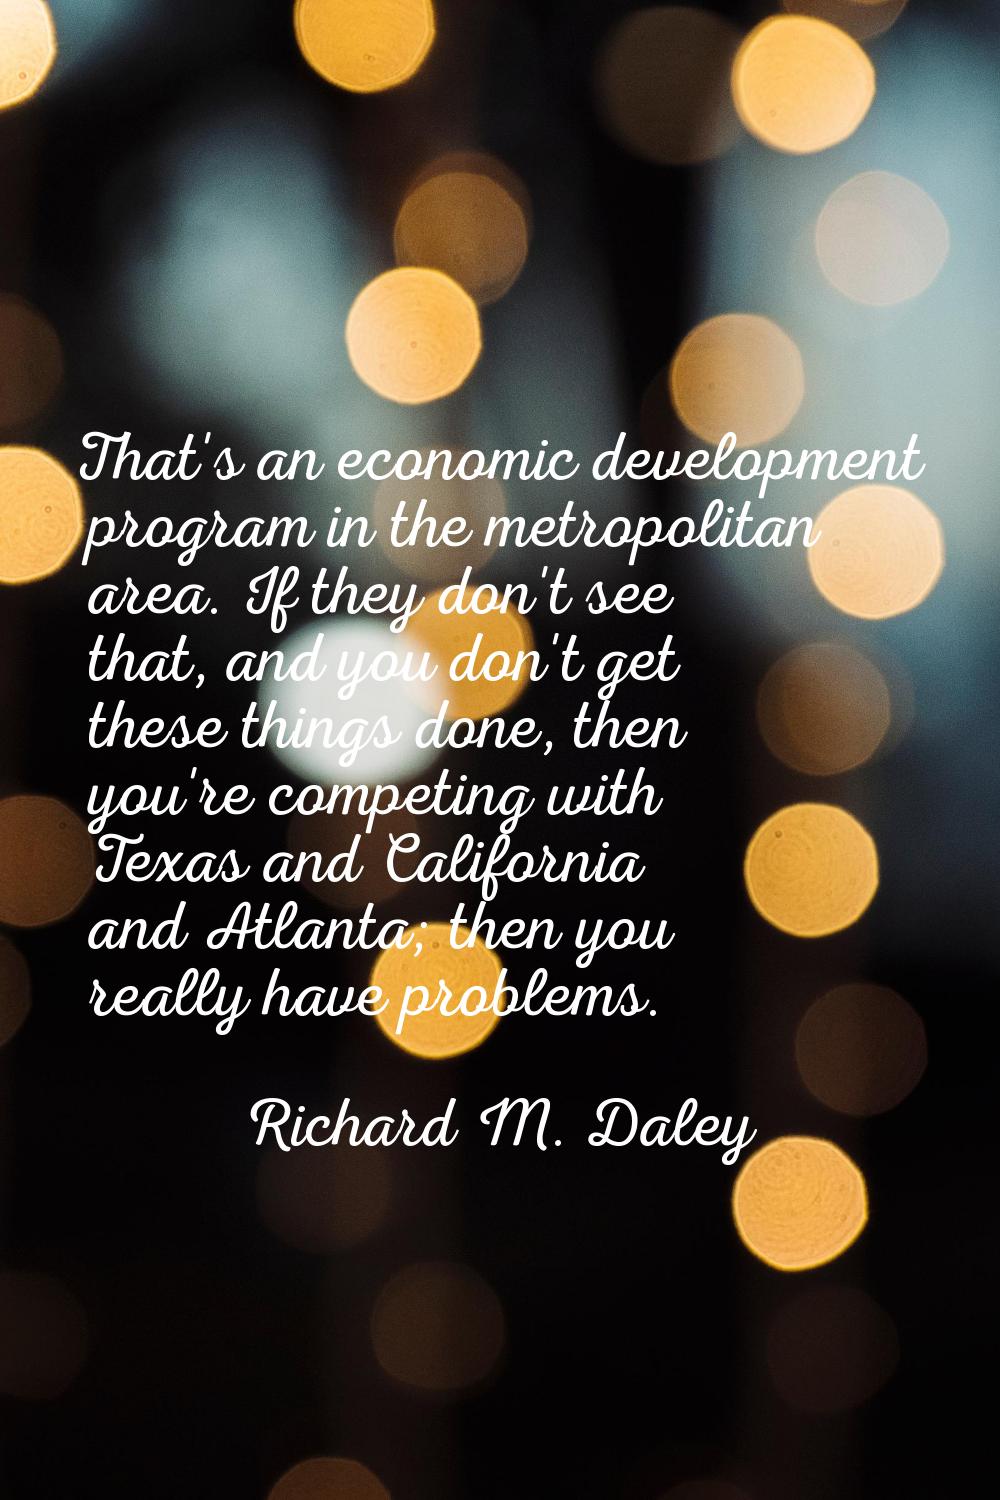 That's an economic development program in the metropolitan area. If they don't see that, and you do